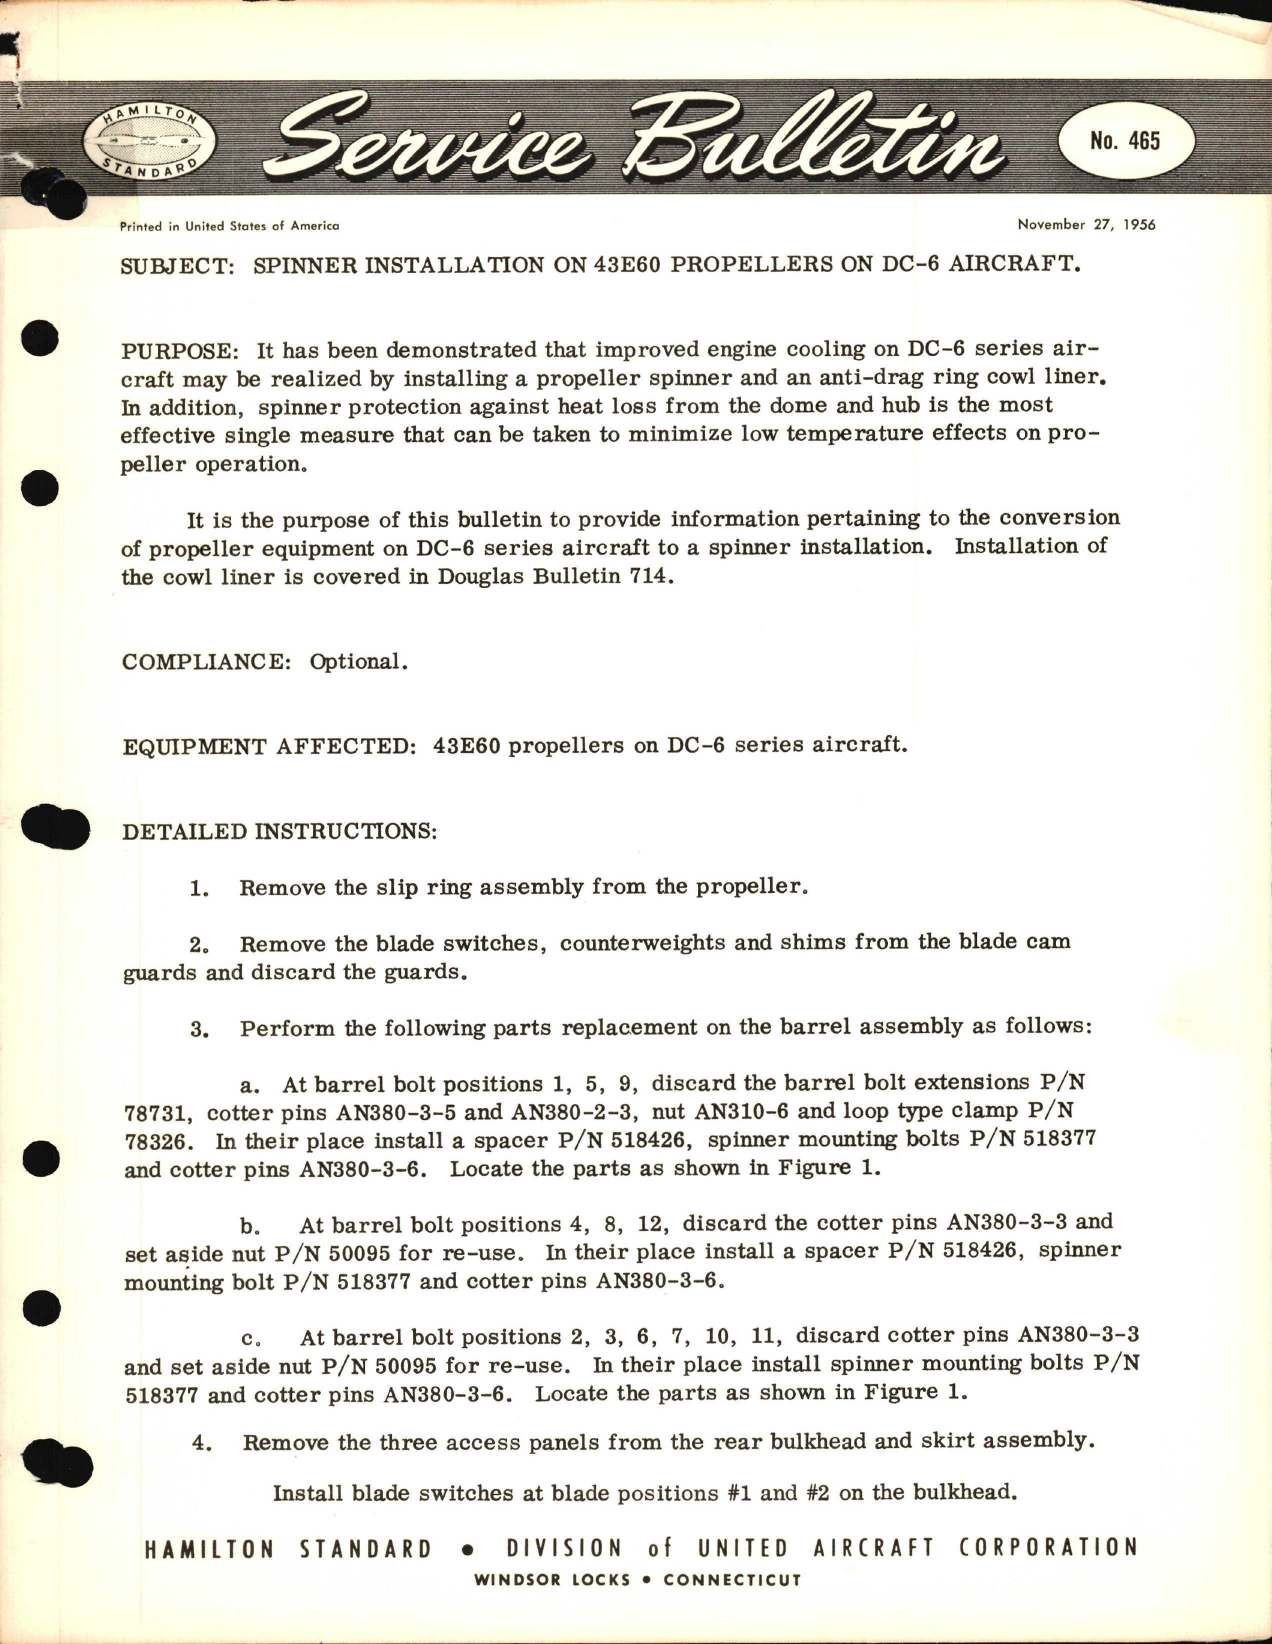 Sample page 1 from AirCorps Library document: Spinner Installation on 43E60 Propellers on DC-6 Aircraft